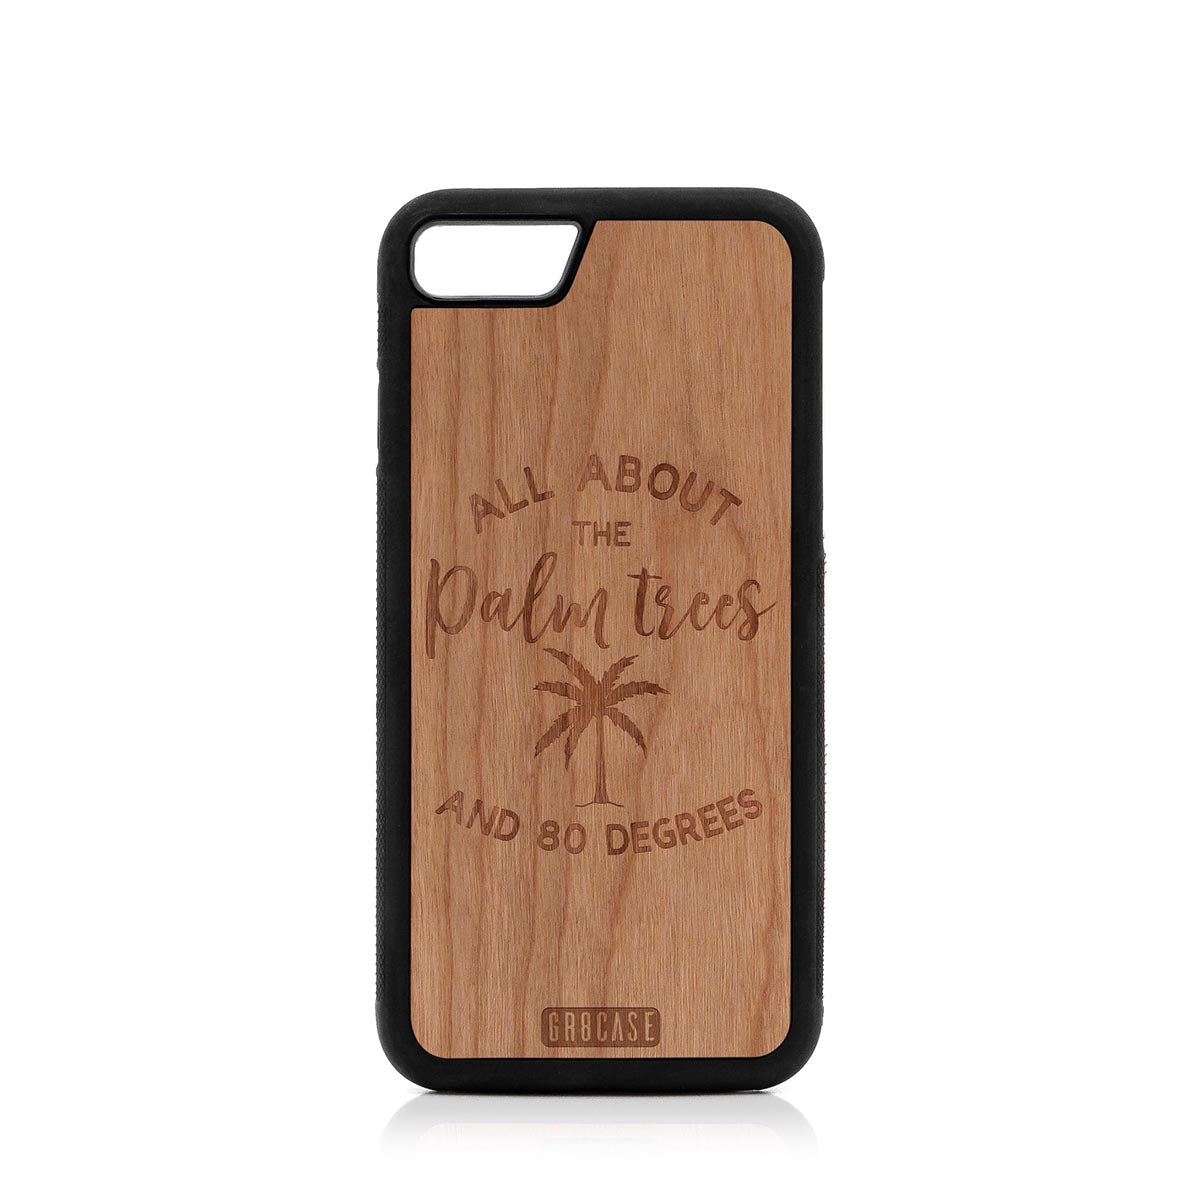 All About The Palm Trees and 80 Degrees Design Wood Case For iPhone 7/8 by GR8CASE